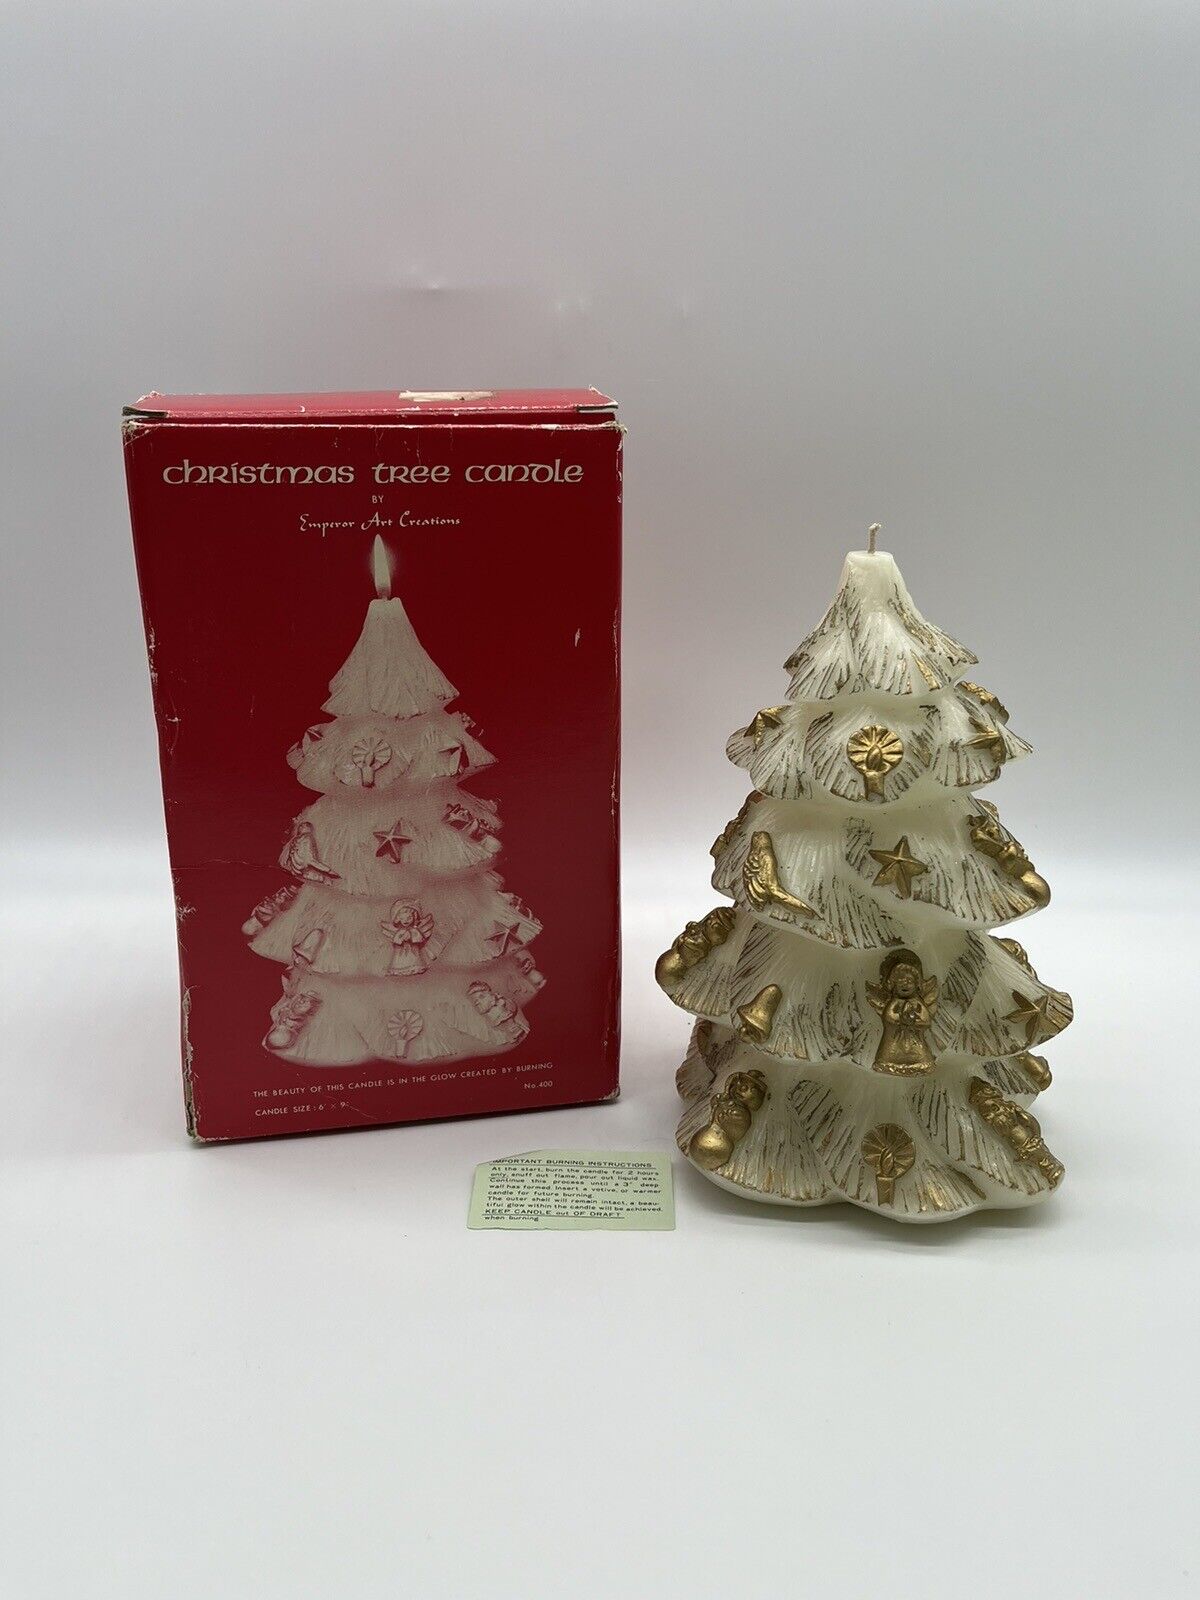 Vintage Christmas Tree Candle by Emperor Art Creations 1985 White Gold Decor